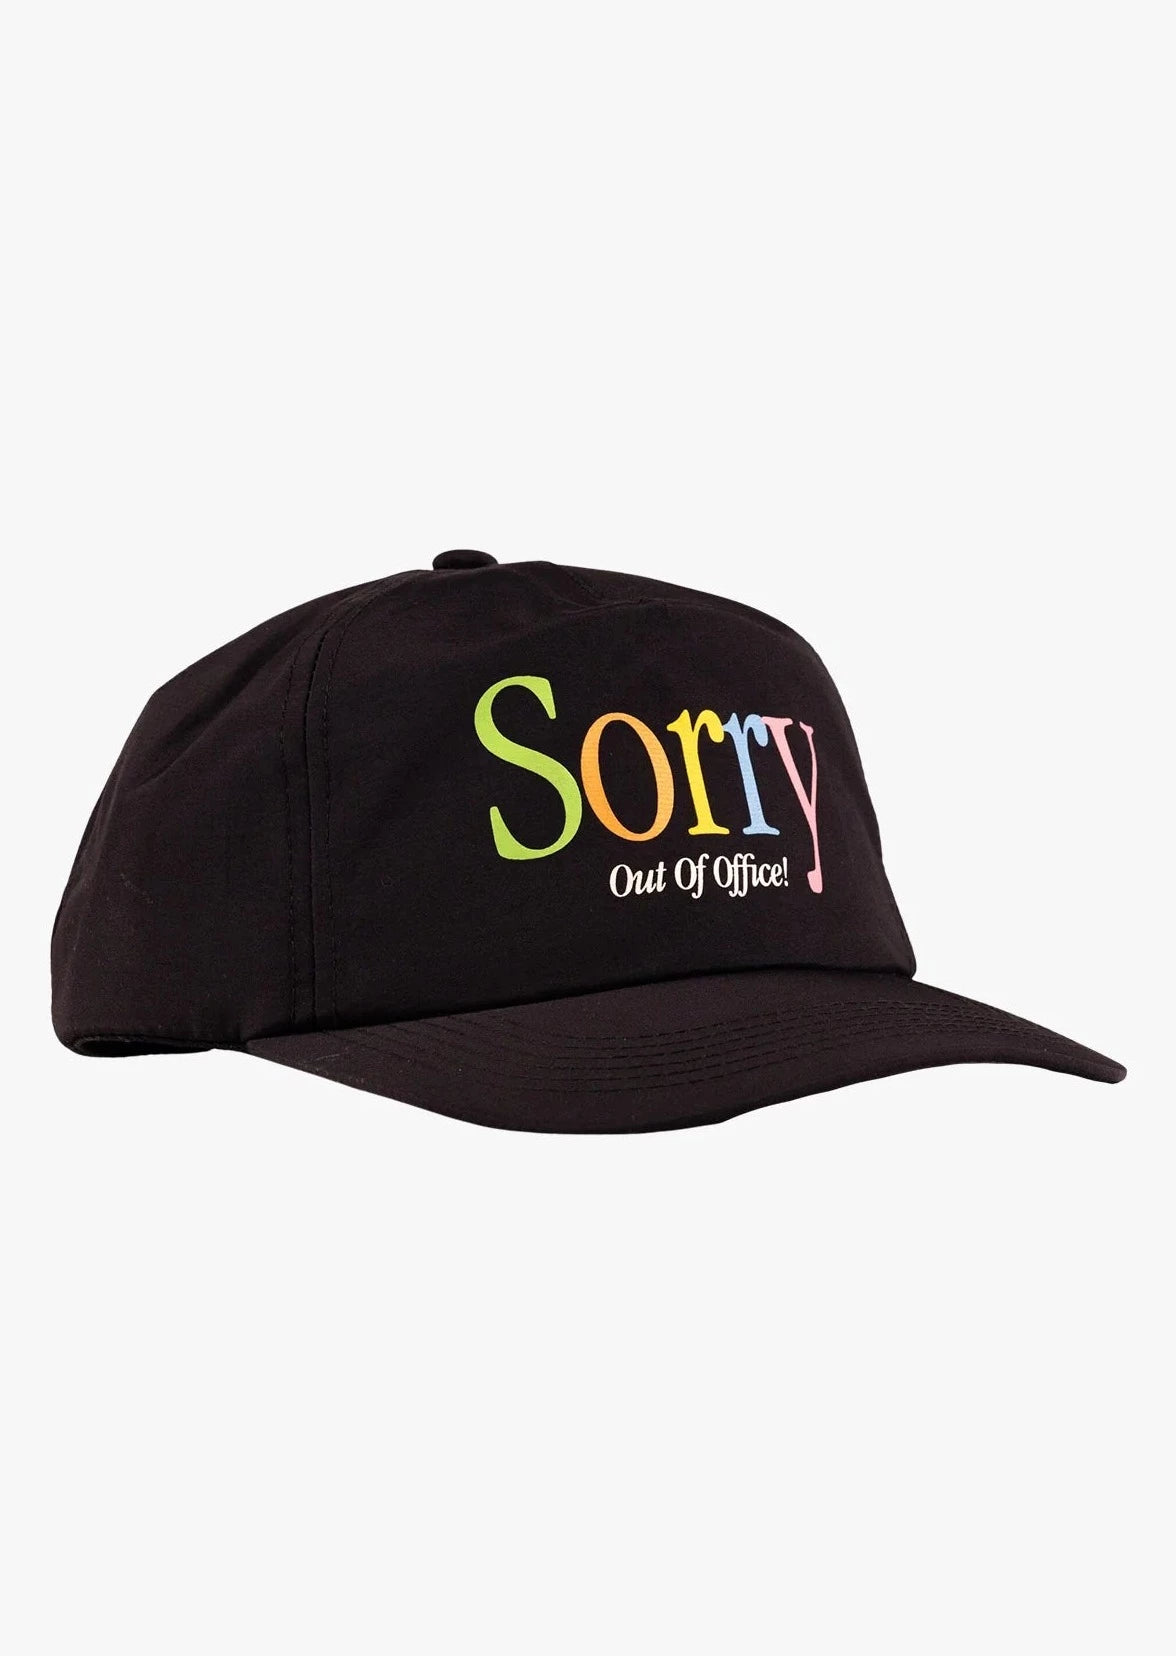 OUT OF OFFICE SNAPBACK HAT